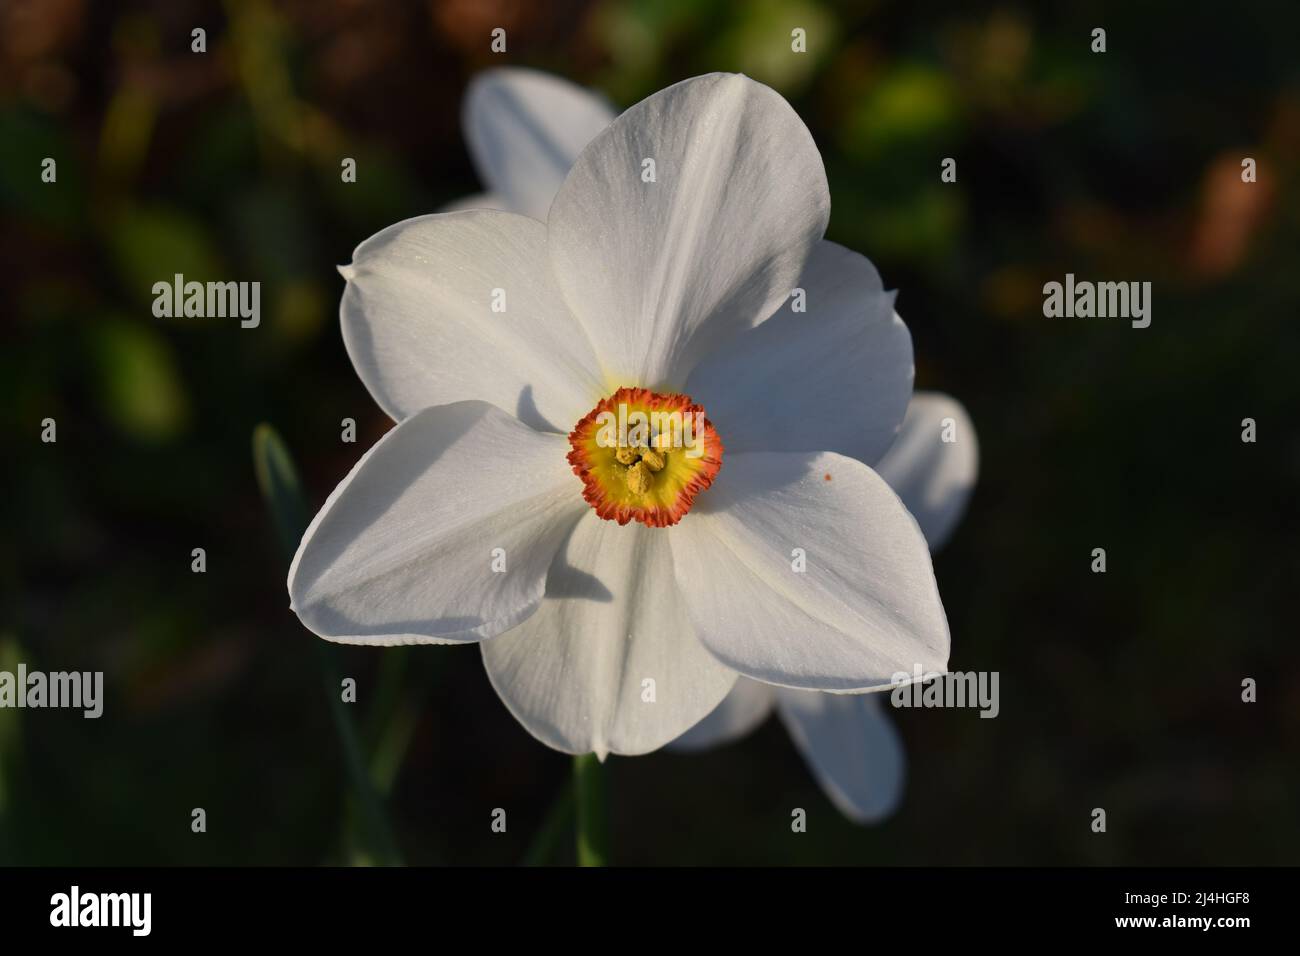 A close up of a white daffodil with an orange and yellow centre (Narcissus poeticus). Stock Photo